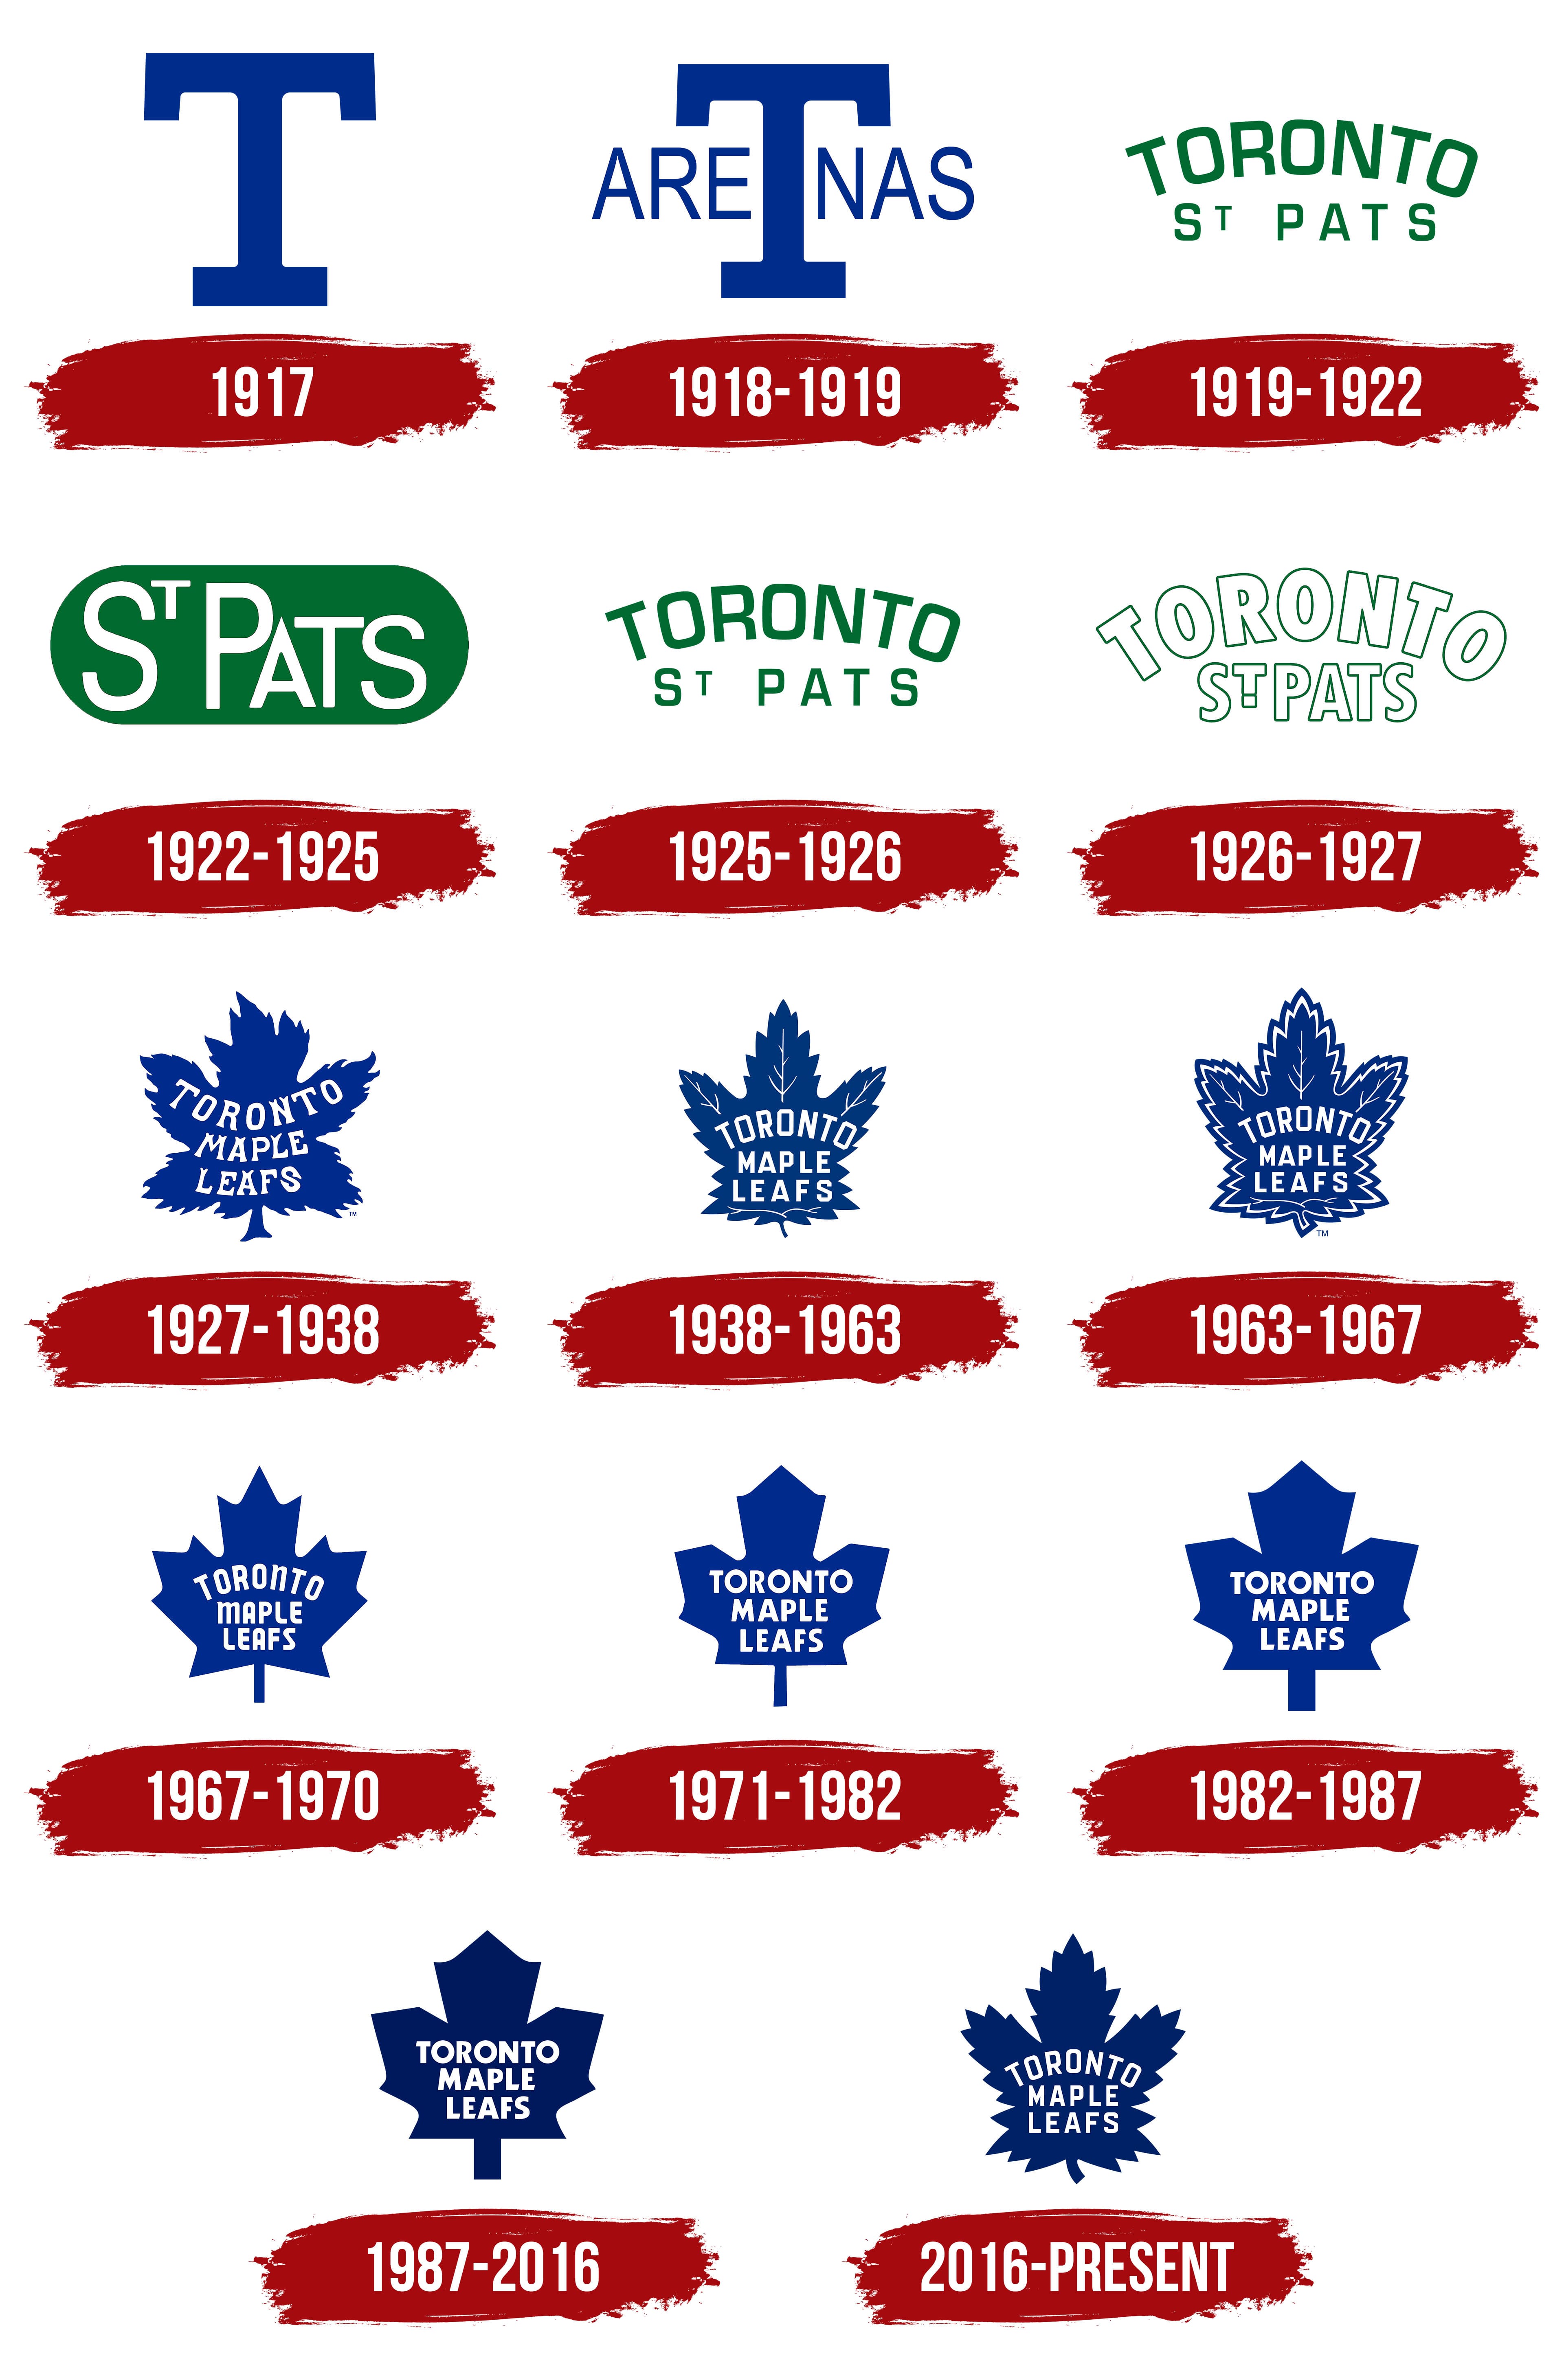 The Story Behind the Toronto Maple Leafs' Adoption of Canada's National  Symbol